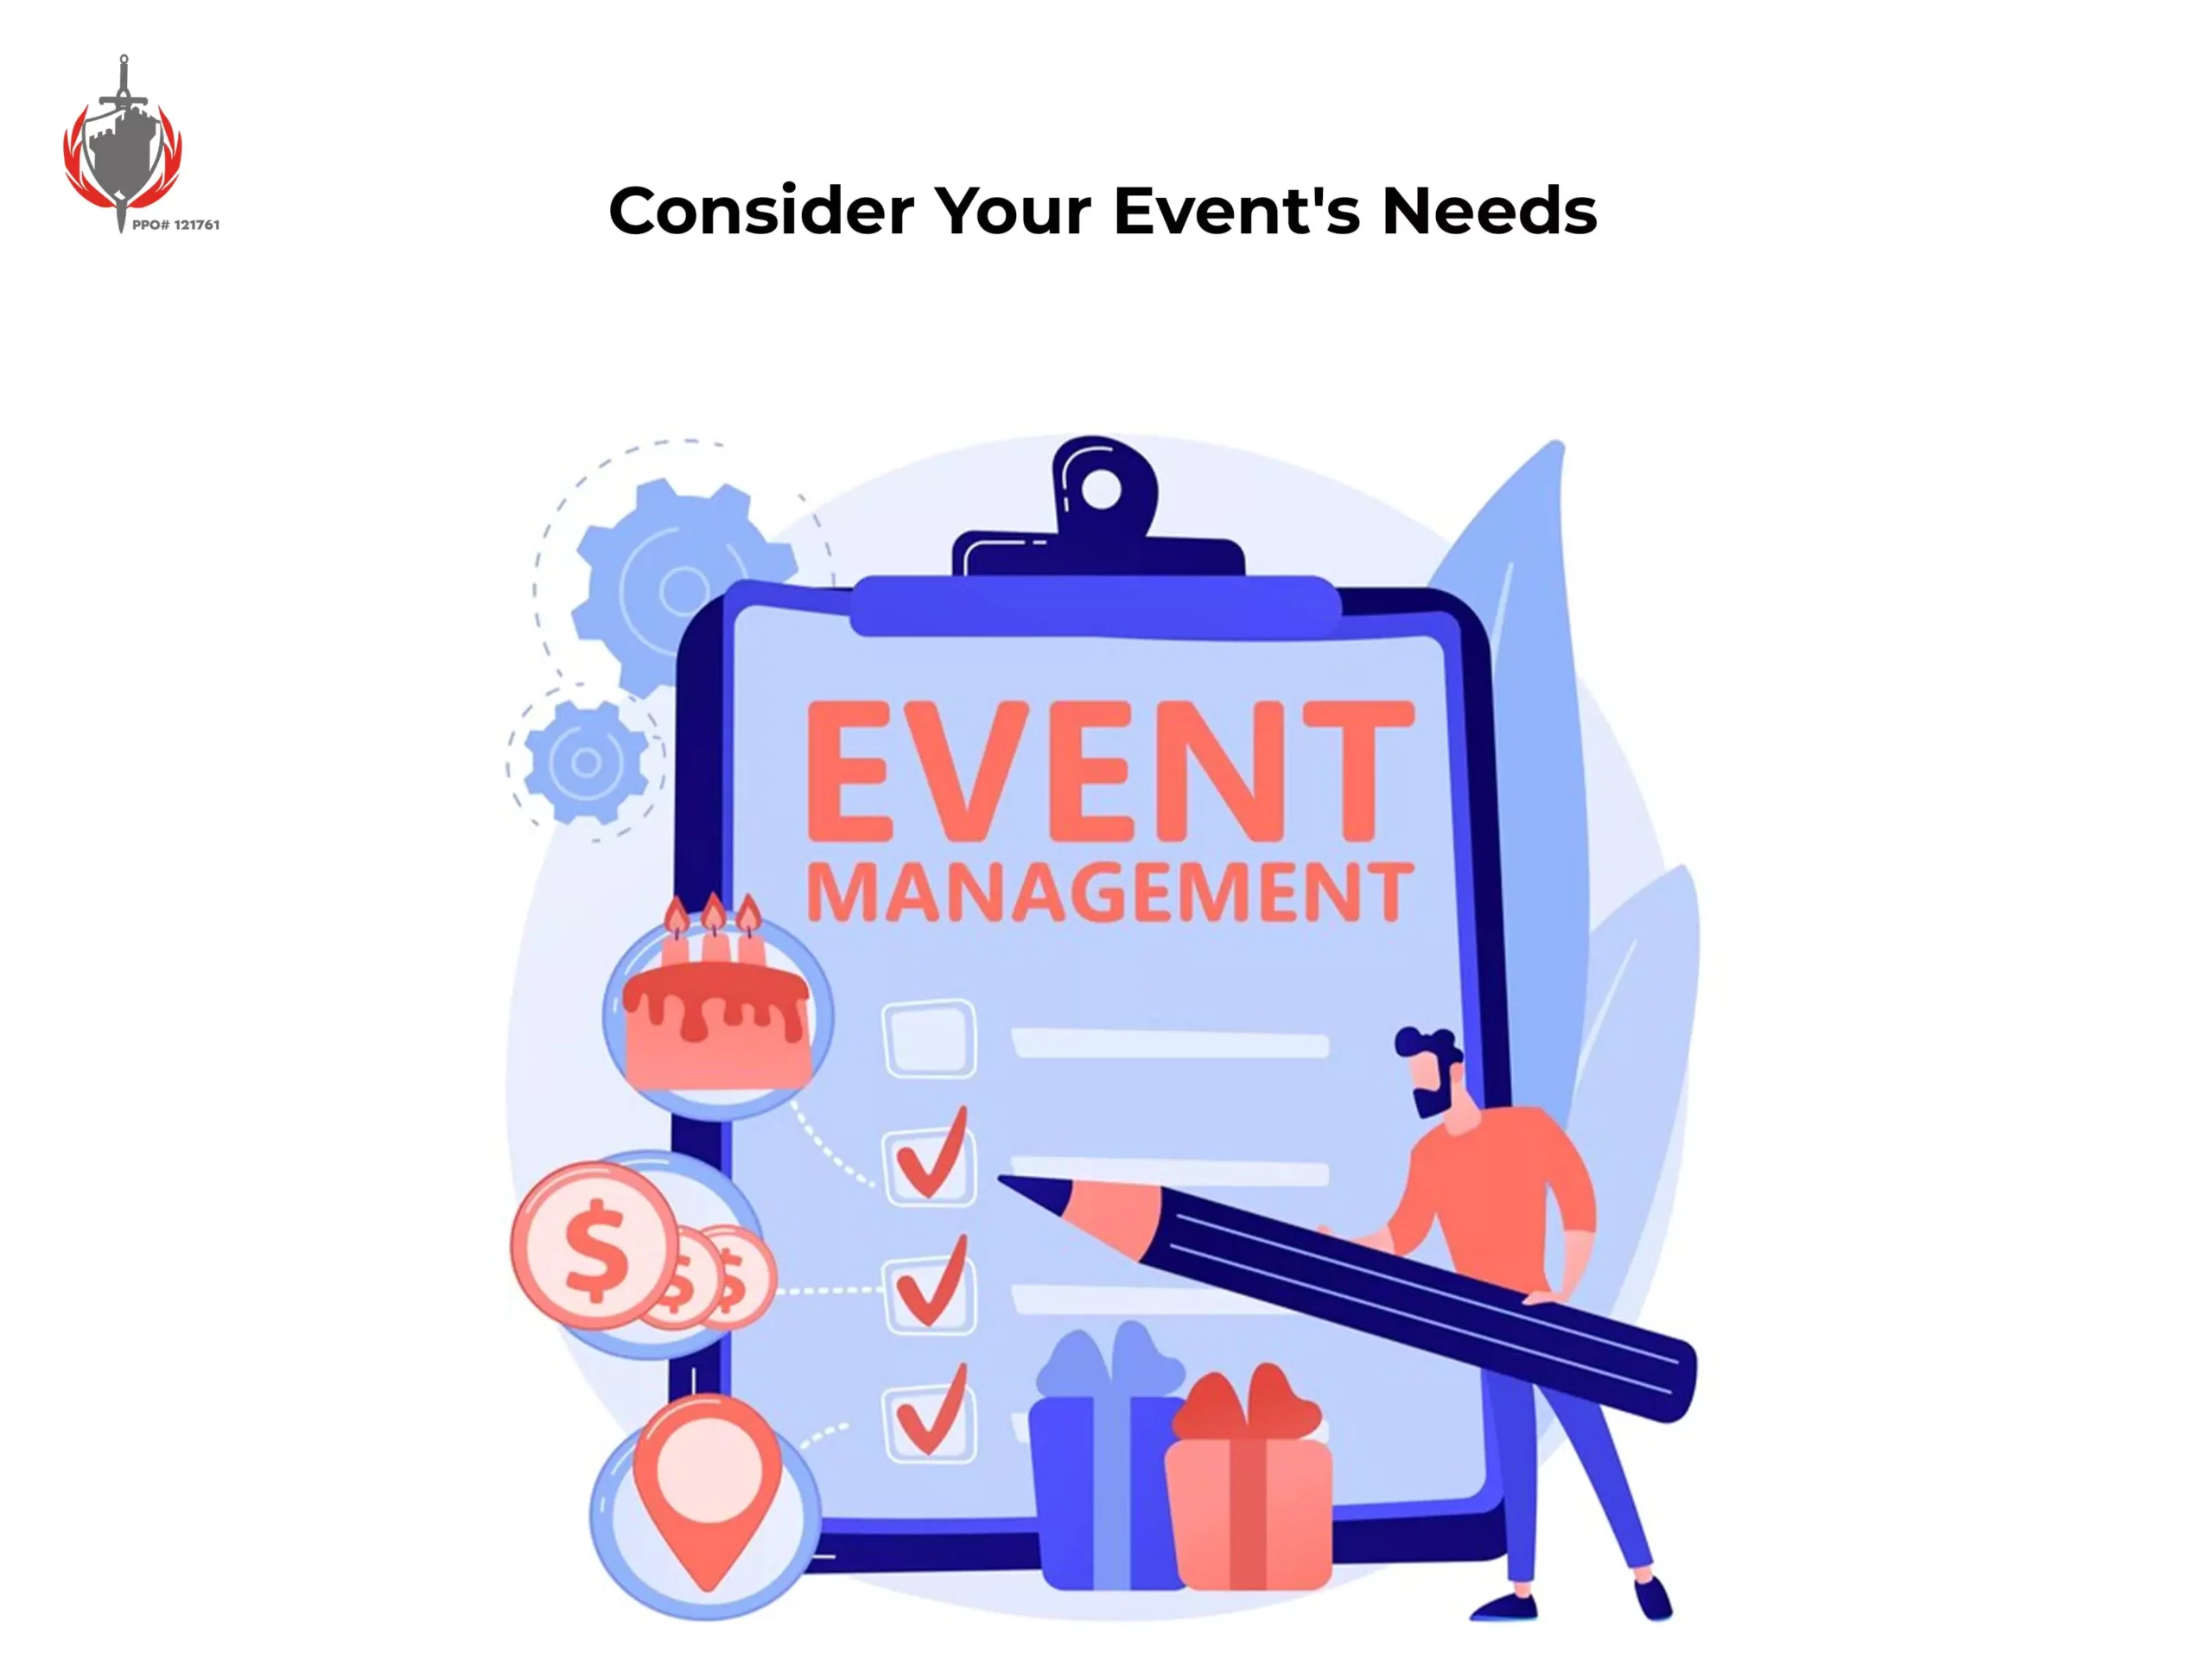 Consider Your Event's Needs